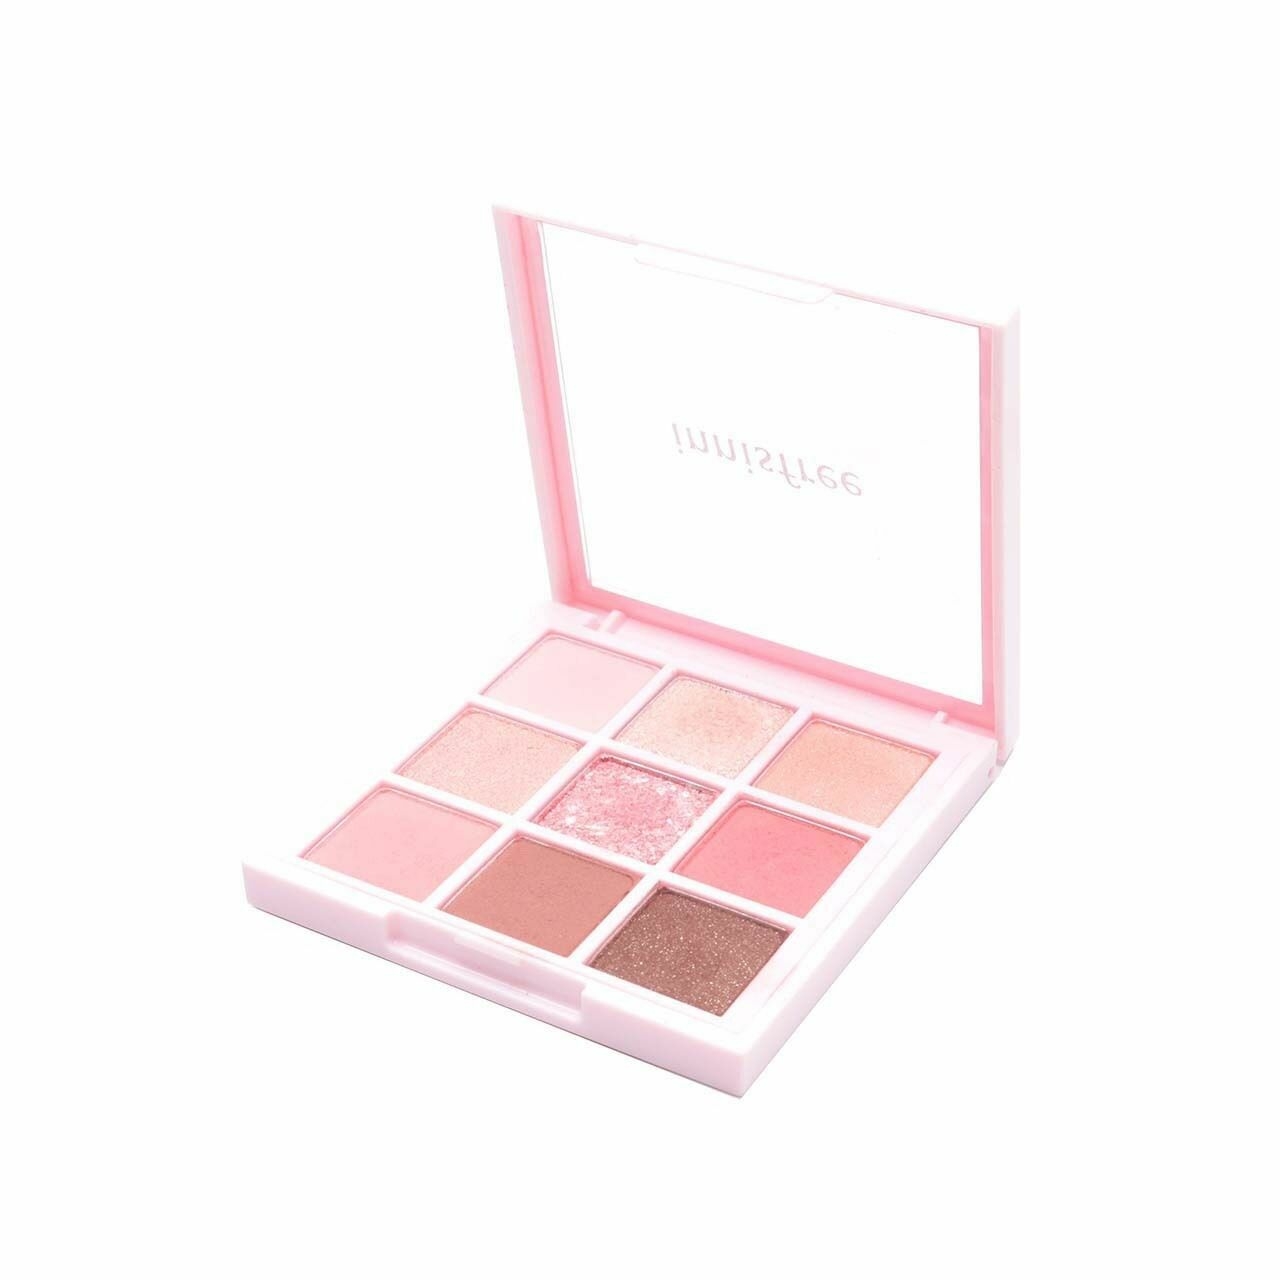 Innisfree Cherry Blossom Eyeshadow Sets and Palette